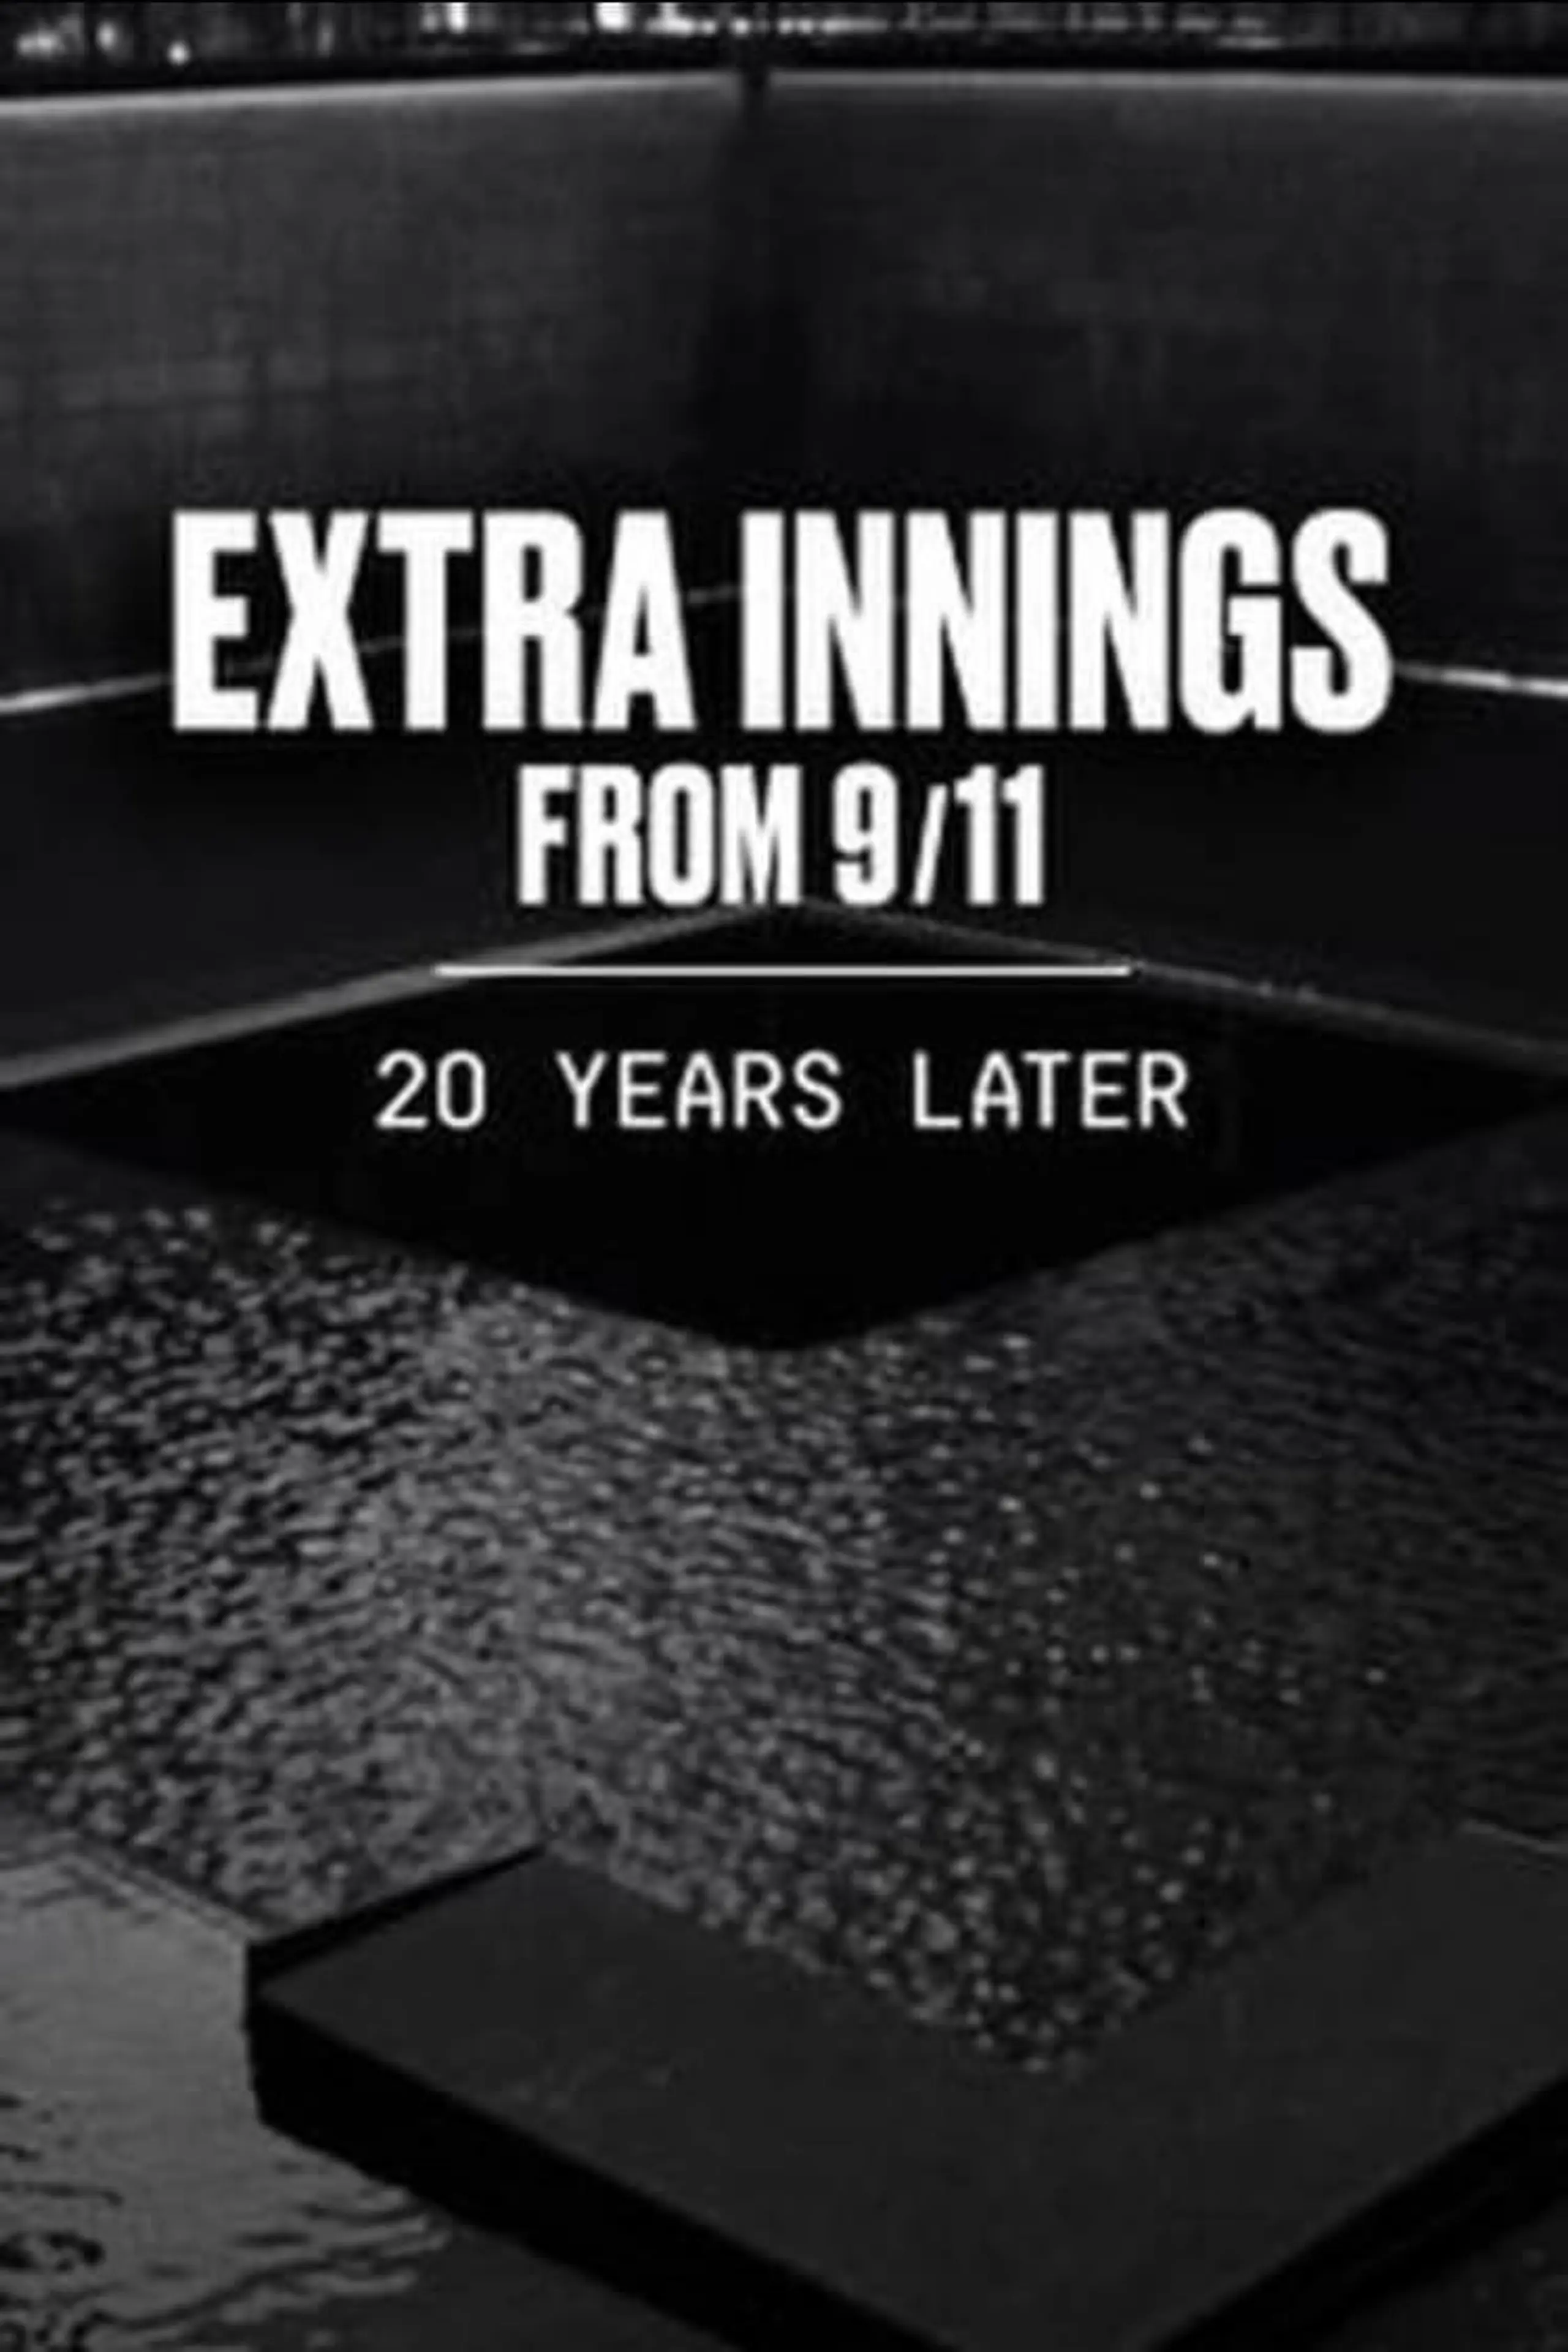 Extra Innings from 9/11: 20 Years Later